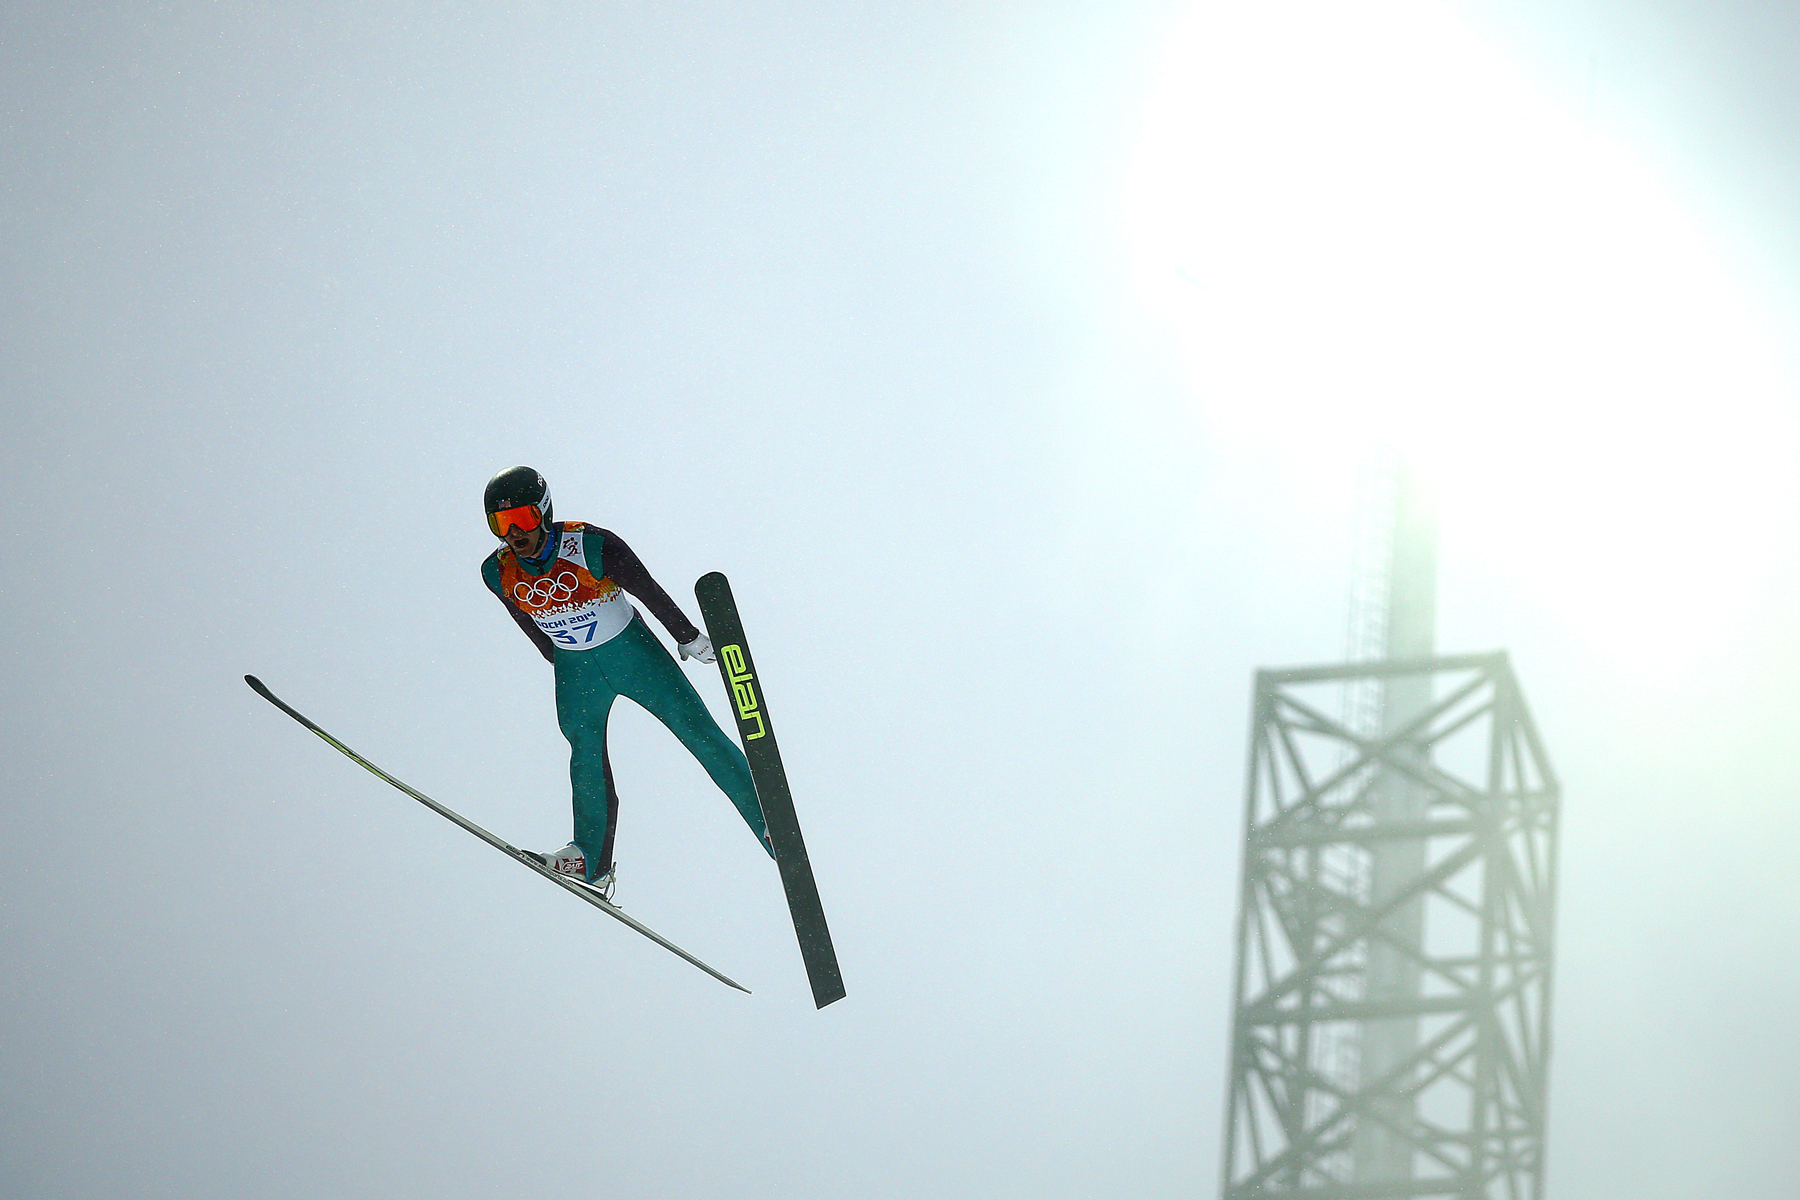 Youth Olympic Games Ski Jumping Criteria